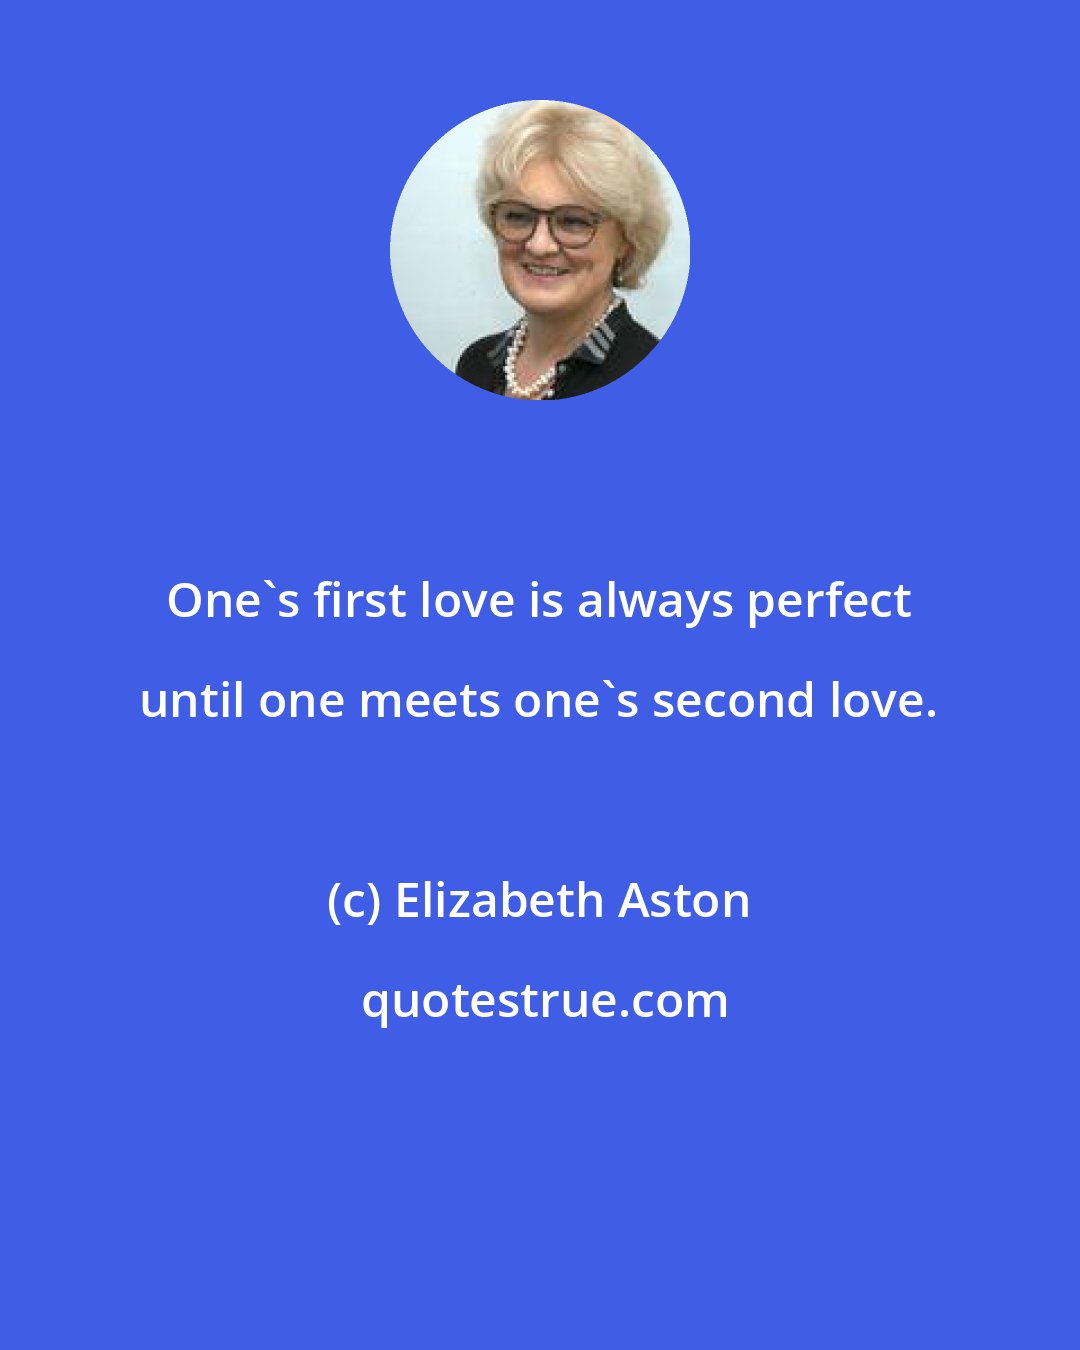 Elizabeth Aston: One's first love is always perfect until one meets one's second love.